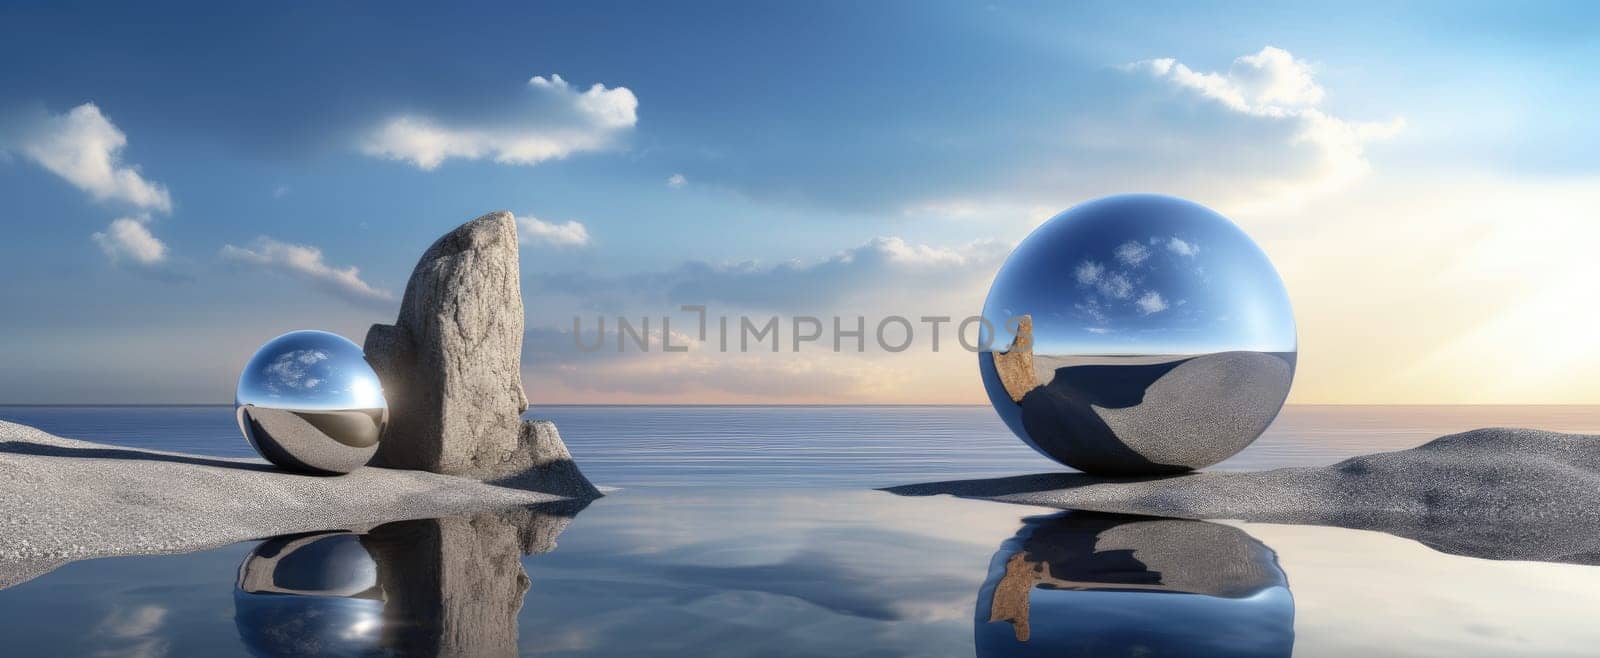 Futuristic background of abstract architecture and water by cherezoff